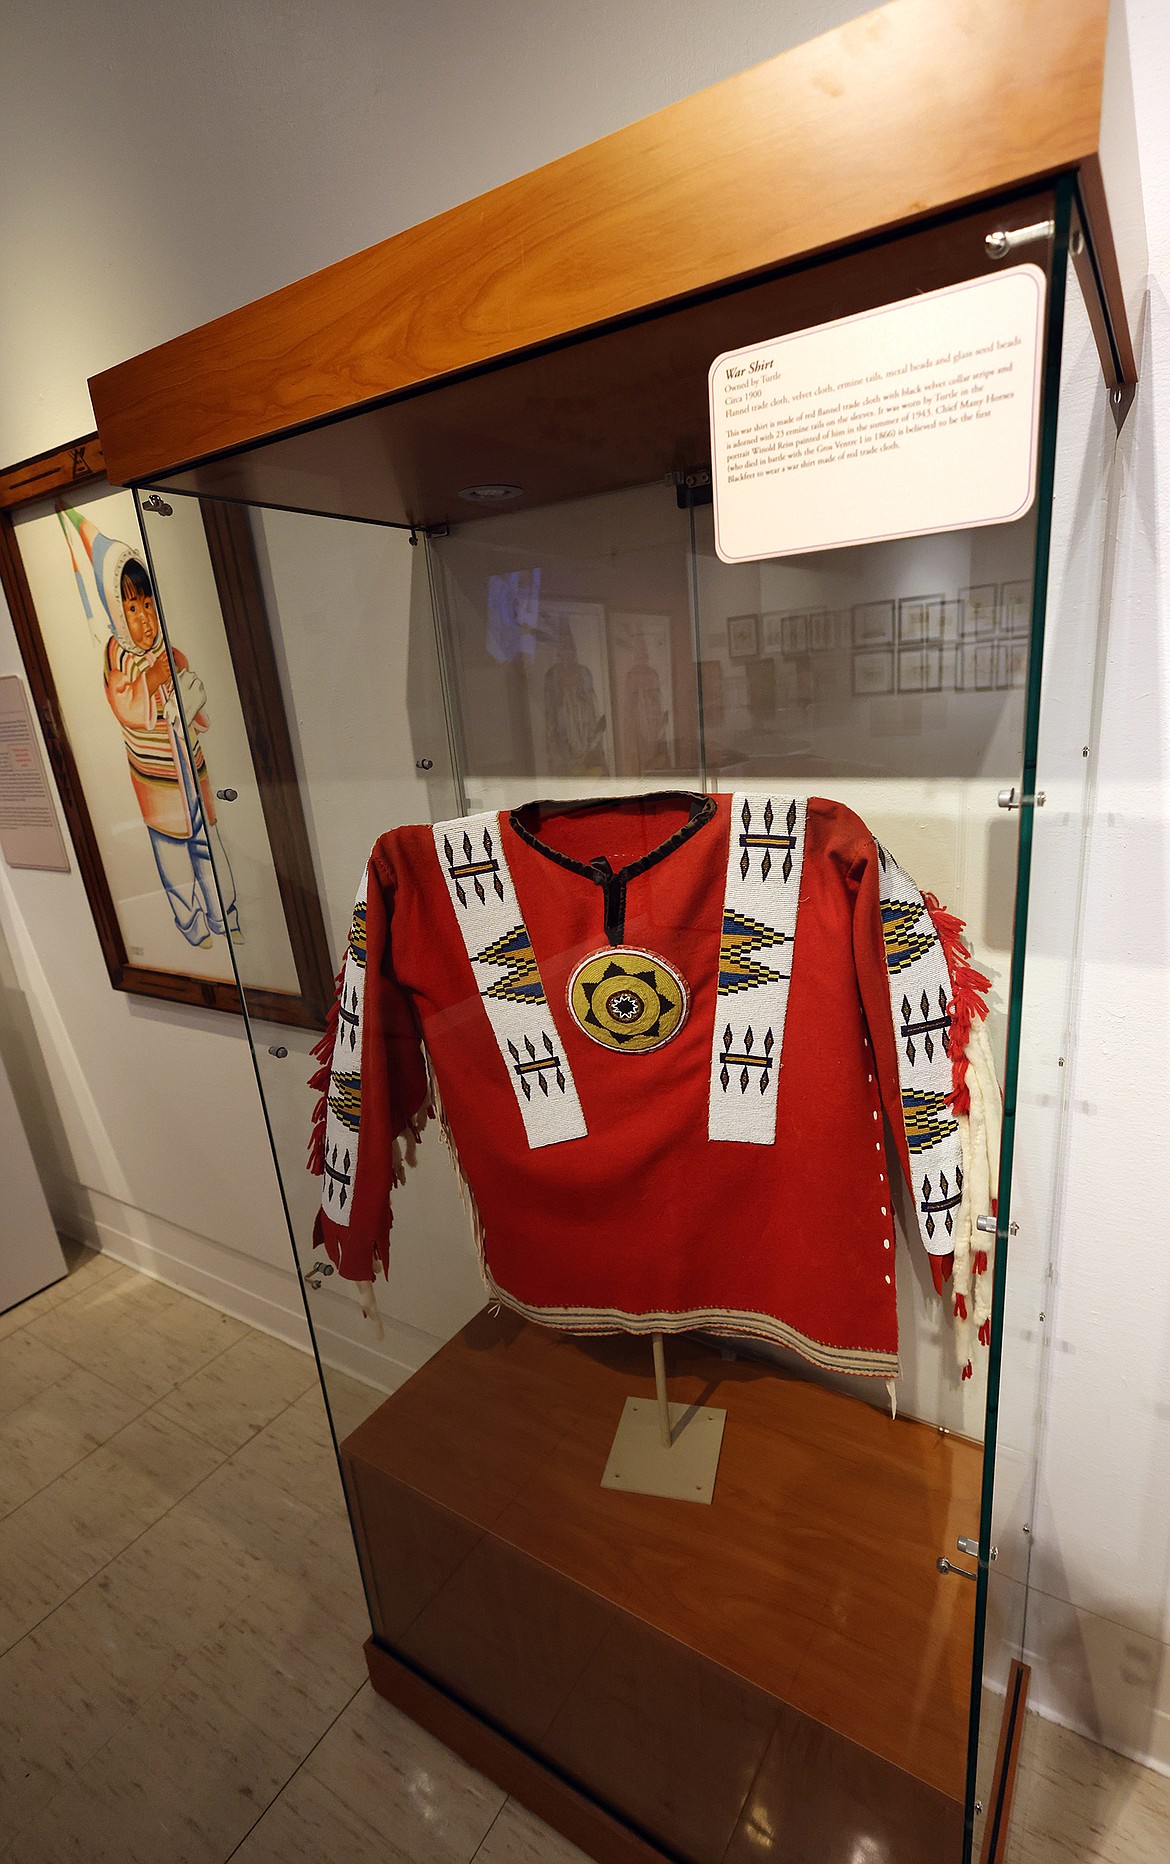 The 1800s red beaded shirt worn by Turtle in one of his Winold Reiss portraits is one of the items connecting the portraits with their subjects as part of the “Connections – the Blackfeet and Winold Reiss” exhibit at the Museum of the Plains Indian in Browning. (Jeremy Weber/Daily Inter Lake)